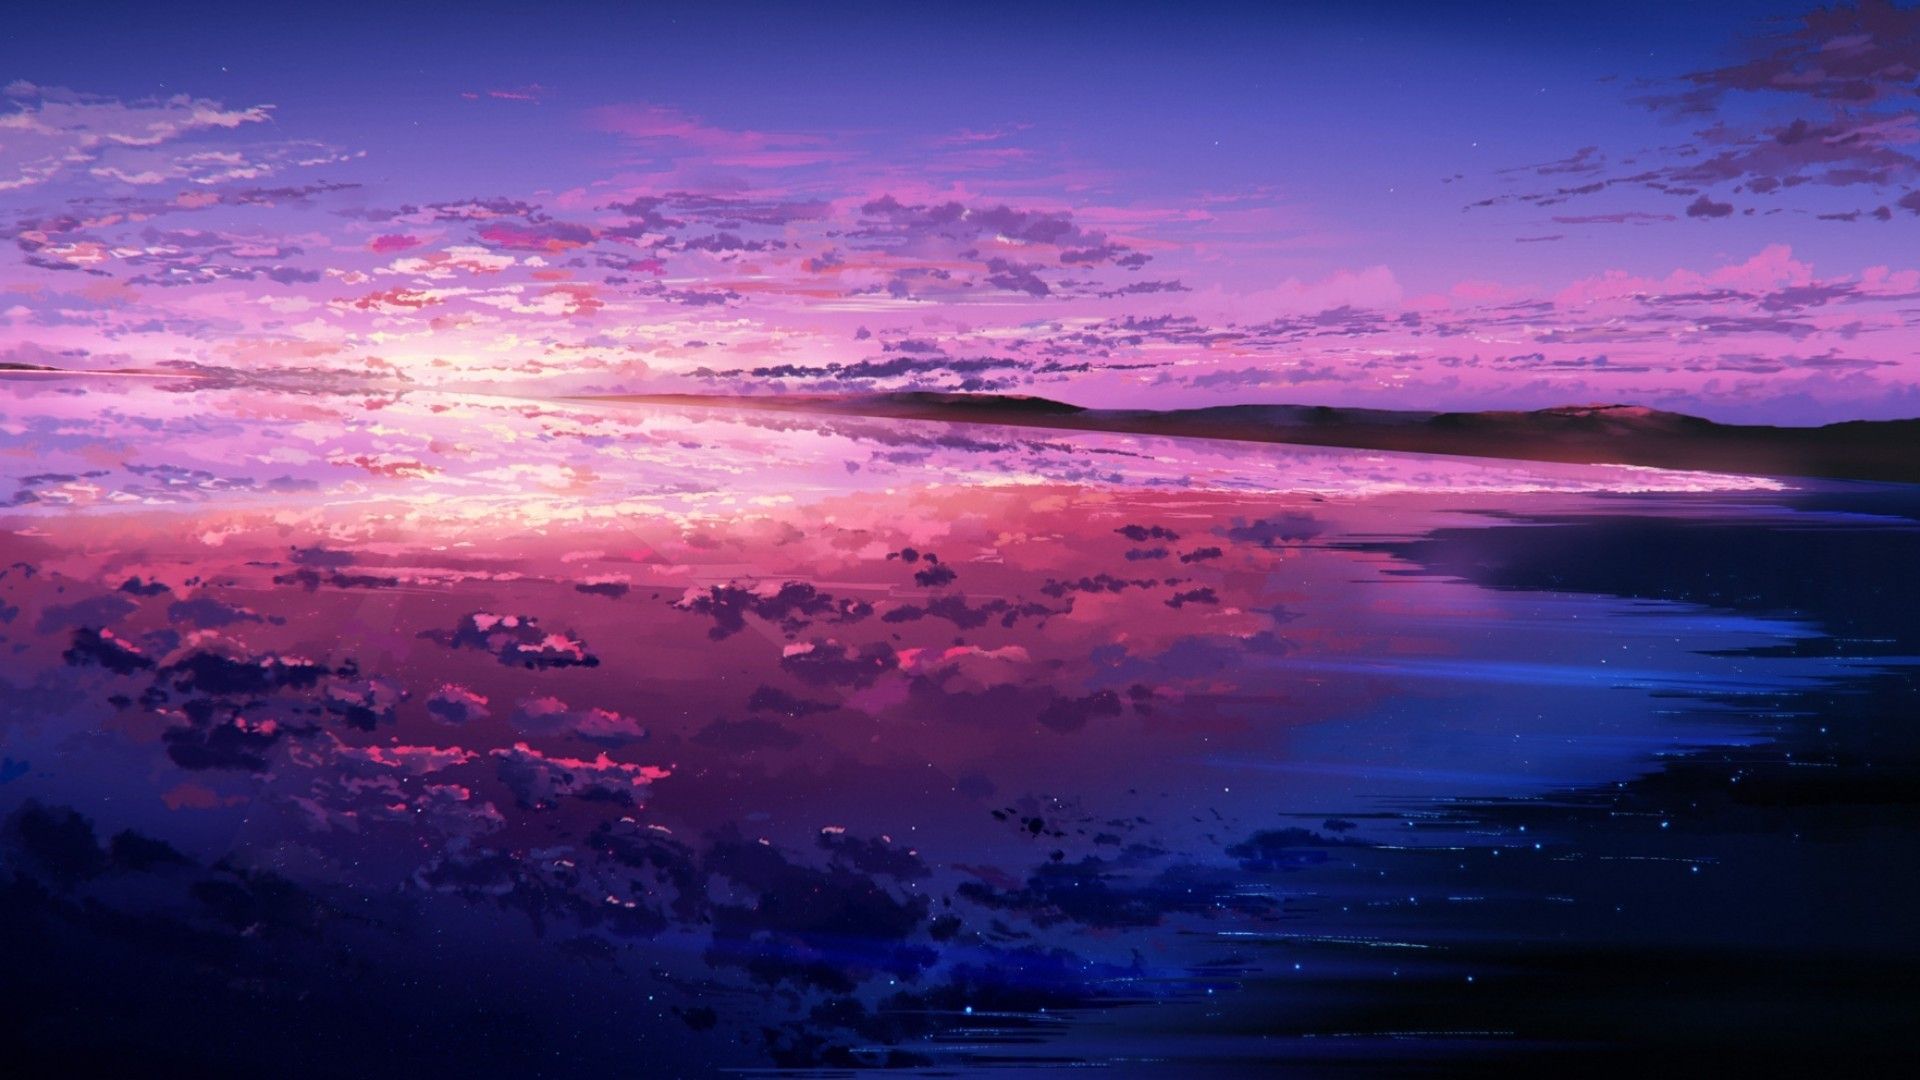 Download 1920x1080 Anime Landscape, Sunset, Scenery, Clouds, Sky